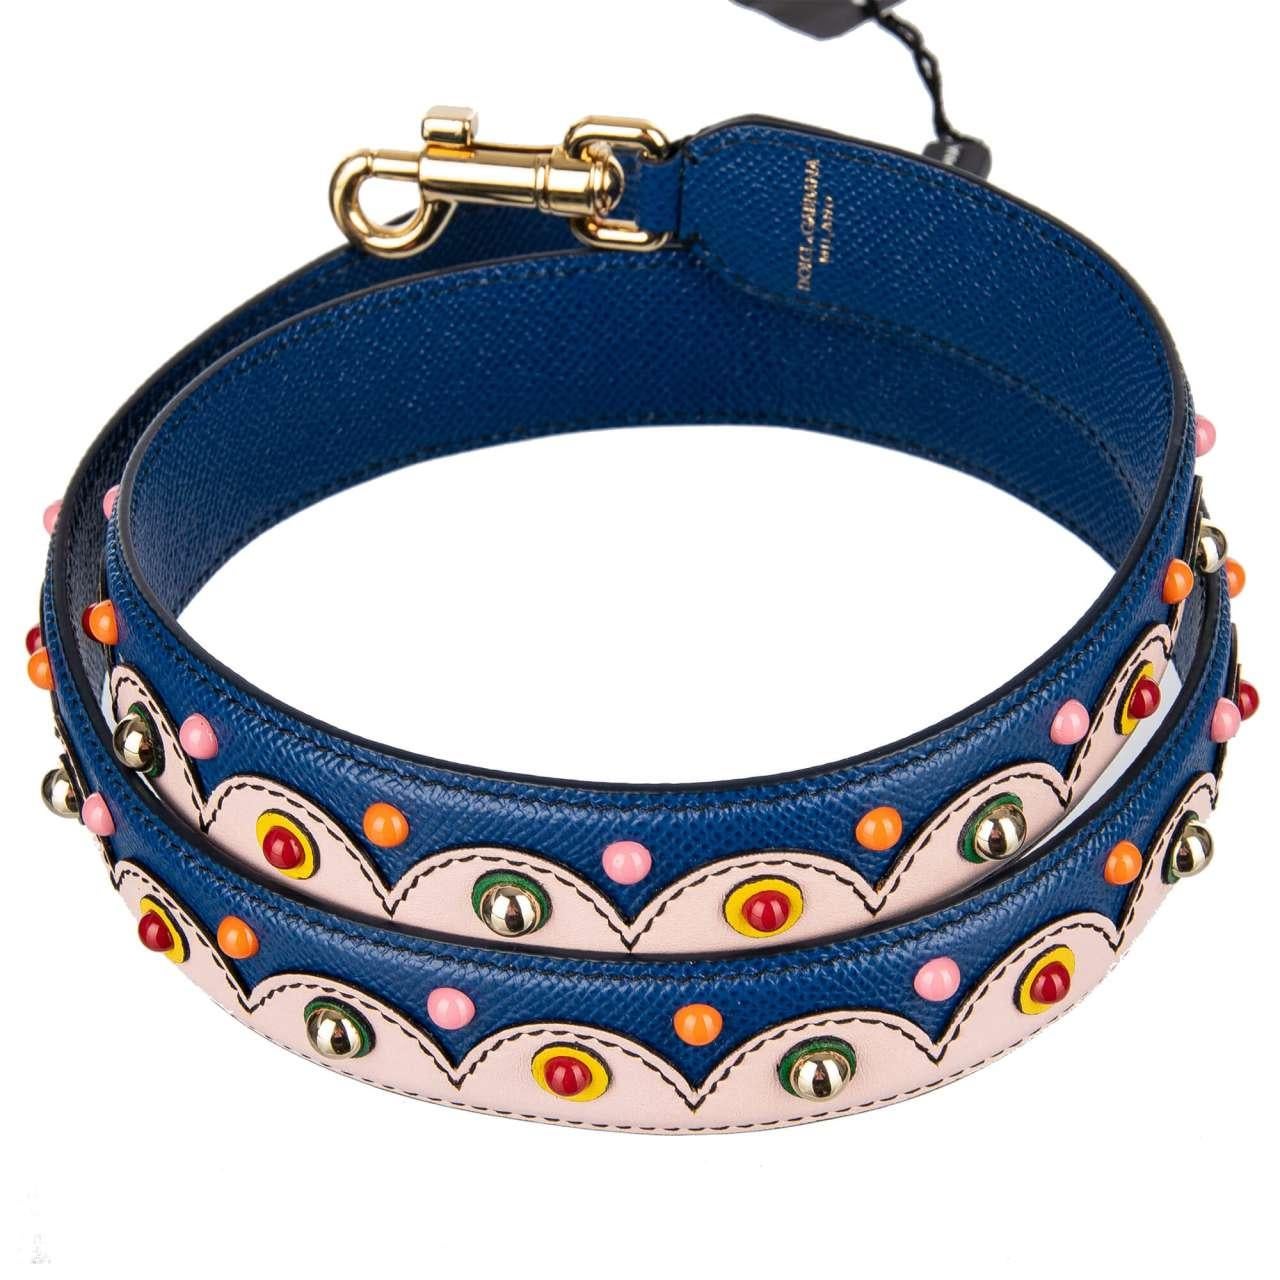 Women's Dolce & Gabbana - Studded Leather Bag Strap Handle Pink Blue Gold For Sale